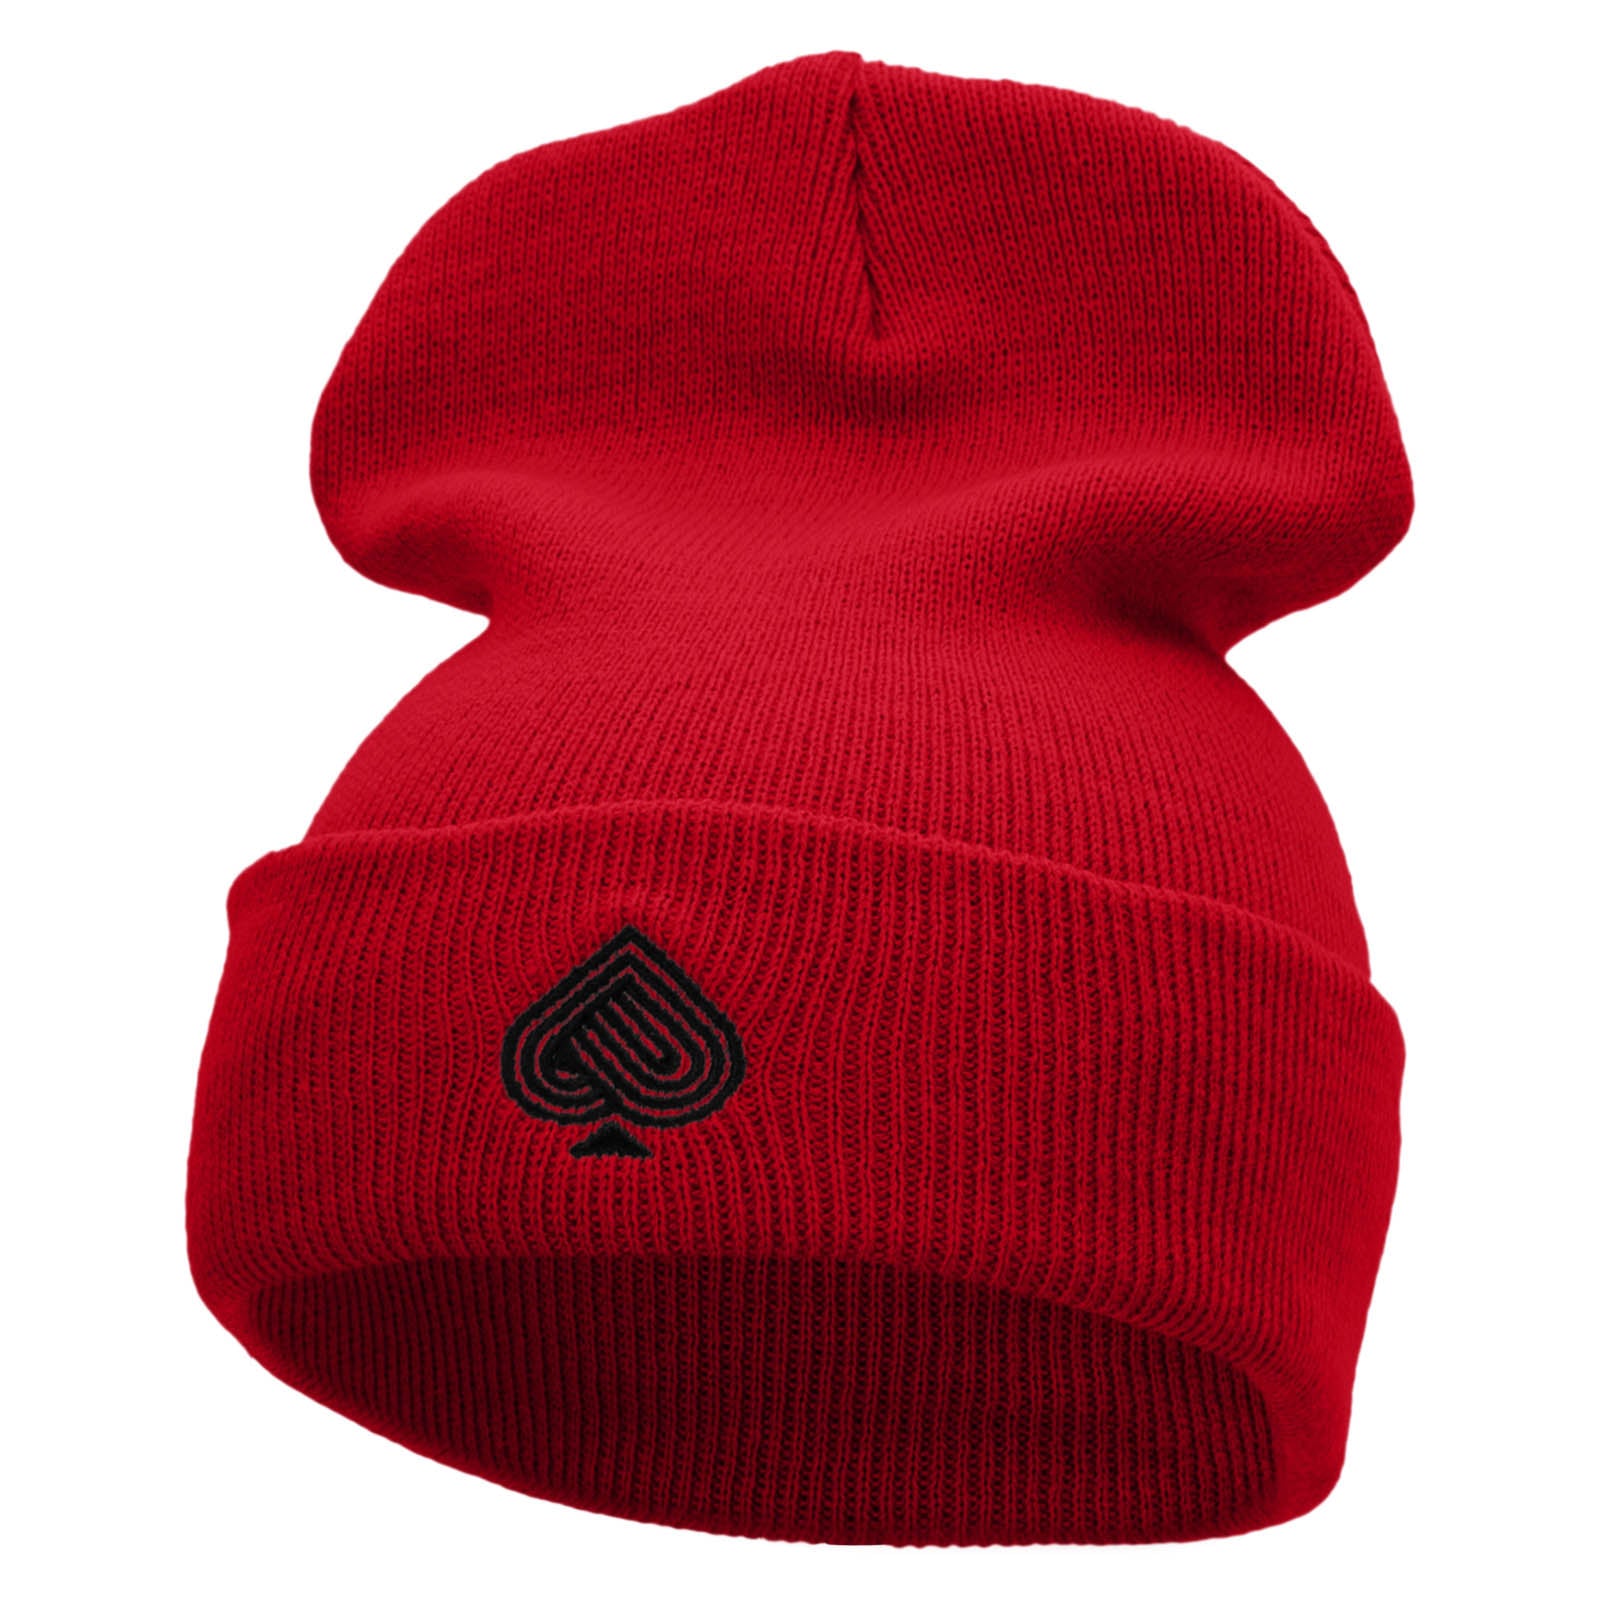 Stylized Spade Embroidered 12 Inch Solid Long Beanie Made in USA - Red OSFM